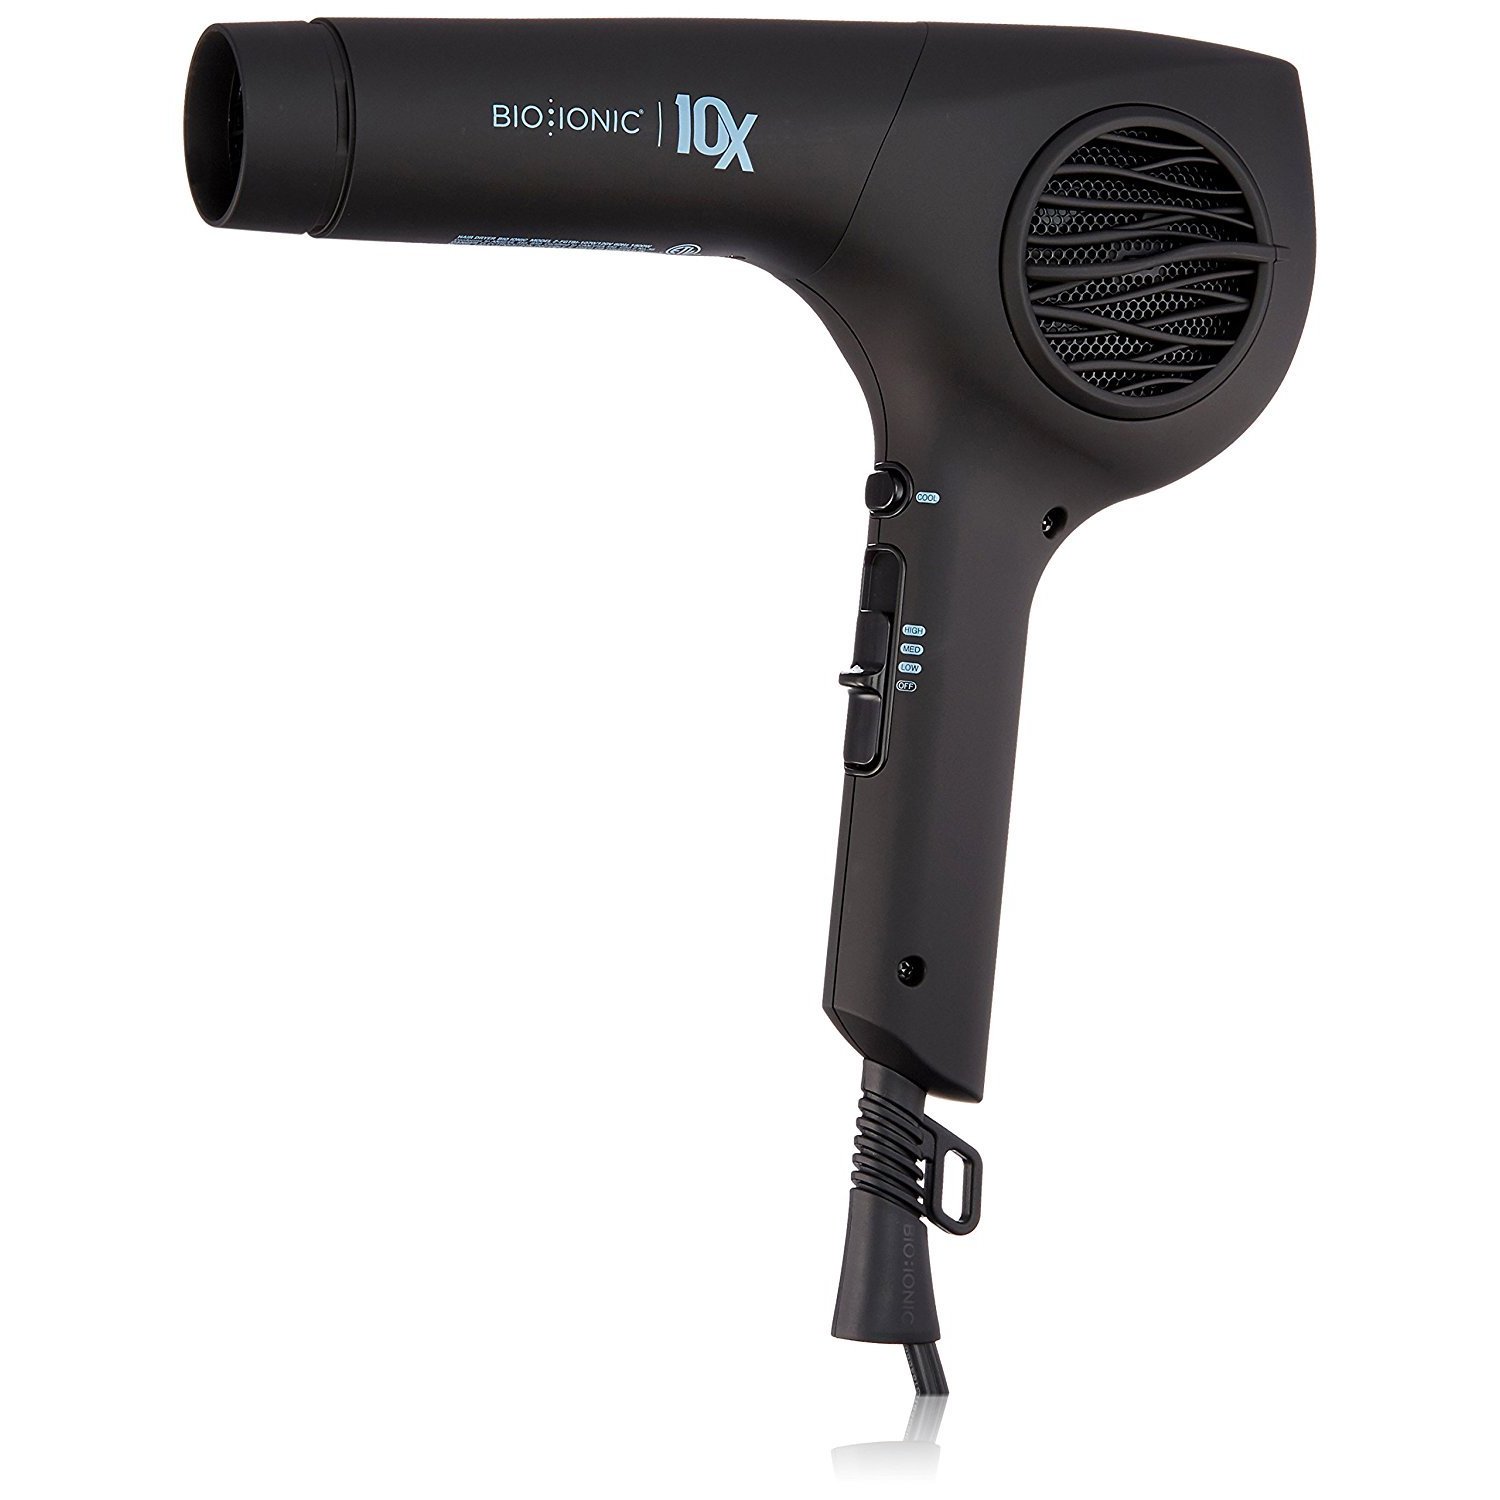 Bio Ionic 10X Volcanic Mx Professional Hair Dryers, Black with Concentrator - image 3 of 4